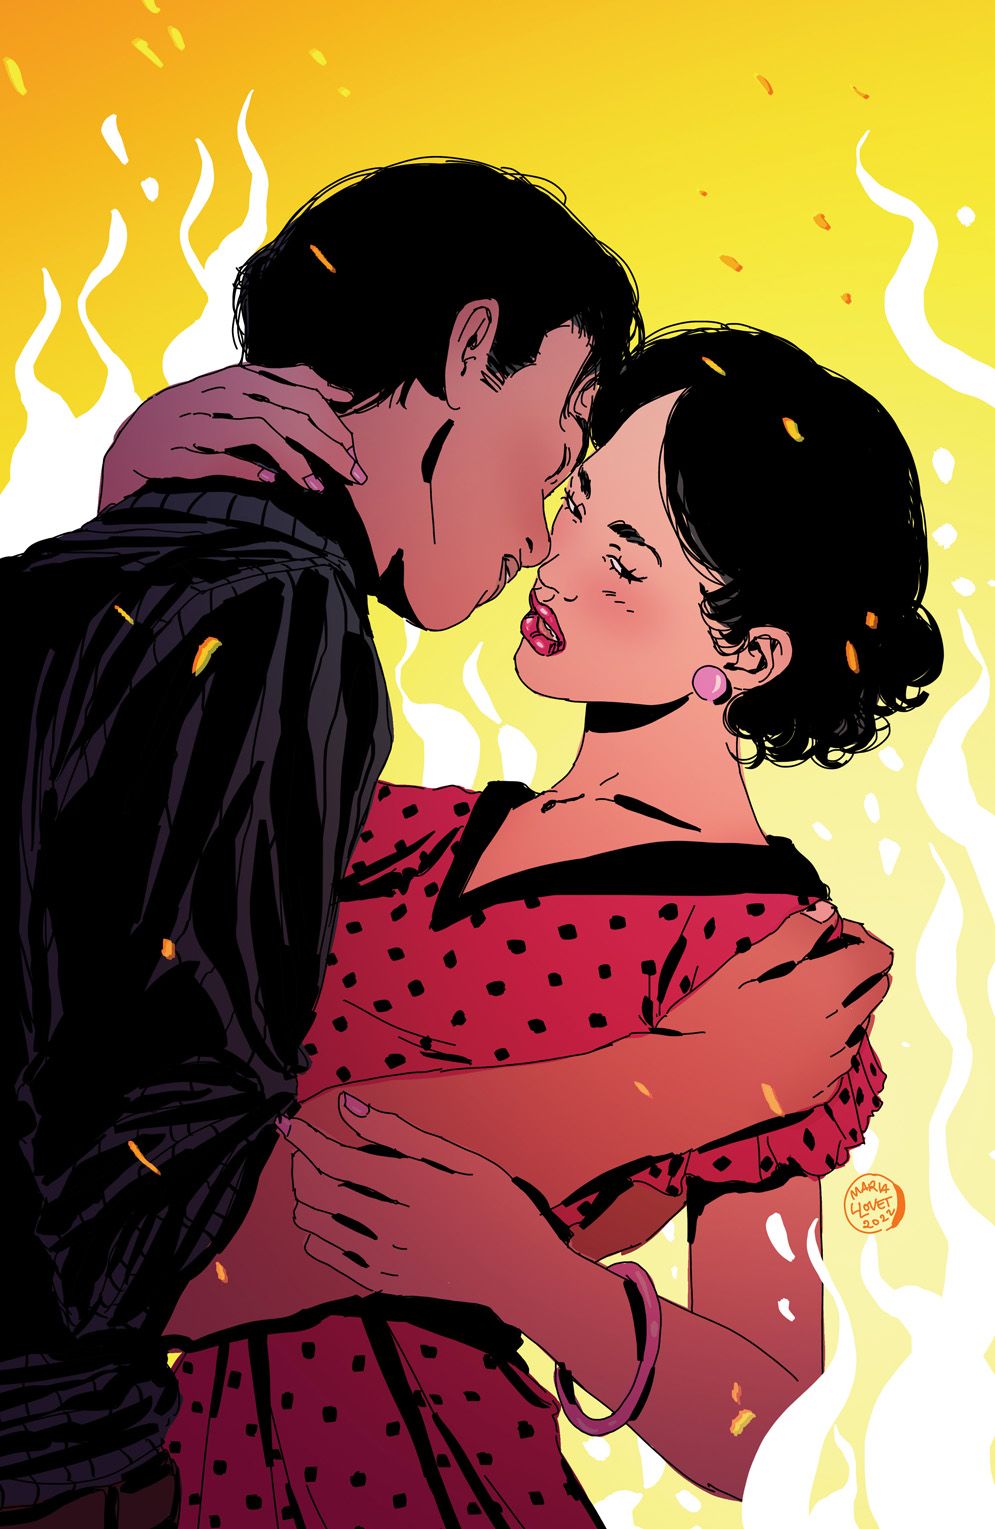 EXCLUSIVE: Love Everlasting Releases New Variant Covers